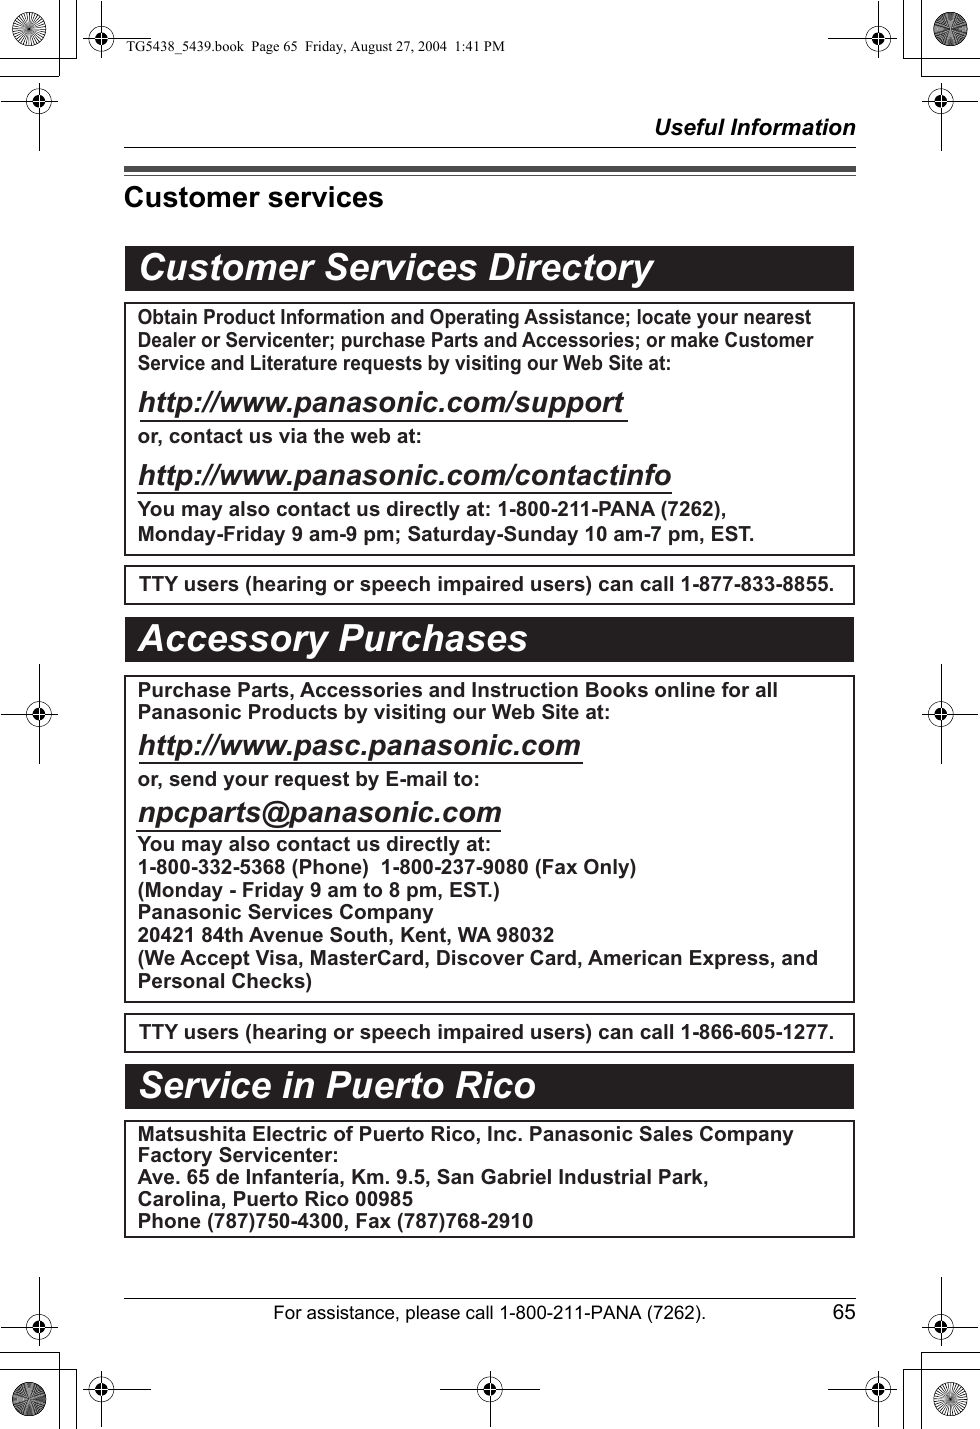 Useful InformationFor assistance, please call 1-800-211-PANA (7262). 65Customer servicesCustomer Services DirectoryObtain Product Information and Operating Assistance; locate your nearest Dealer or Servicenter; purchase Parts and Accessories; or make Customer Service and Literature requests by visiting our Web Site at:http://www.panasonic.com/supportor, contact us via the web at:http://www.panasonic.com/contactinfoYou may also contact us directly at: 1-800-211-PANA (7262),Monday-Friday 9 am-9 pm; Saturday-Sunday 10 am-7 pm, EST.TTY users (hearing or speech impaired users) can call 1-877-833-8855.TTY users (hearing or speech impaired users) can call 1-866-605-1277.Purchase Parts, Accessories and Instruction Books online for all Panasonic Products by visiting our Web Site at:http://www.pasc.panasonic.comor, send your request by E-mail to:npcparts@panasonic.comYou may also contact us directly at:1-800-332-5368 (Phone)  1-800-237-9080 (Fax Only) (Monday - Friday 9 am to 8 pm, EST.)Panasonic Services Company20421 84th Avenue South, Kent, WA 98032(We Accept Visa, MasterCard, Discover Card, American Express, and Personal Checks)Accessory PurchasesService in Puerto RicoMatsushita Electric of Puerto Rico, Inc. Panasonic Sales CompanyFactory Servicenter:Ave. 65 de Infantería, Km. 9.5, San Gabriel Industrial Park,Carolina, Puerto Rico 00985Phone (787)750-4300, Fax (787)768-2910TG5438_5439.book  Page 65  Friday, August 27, 2004  1:41 PM